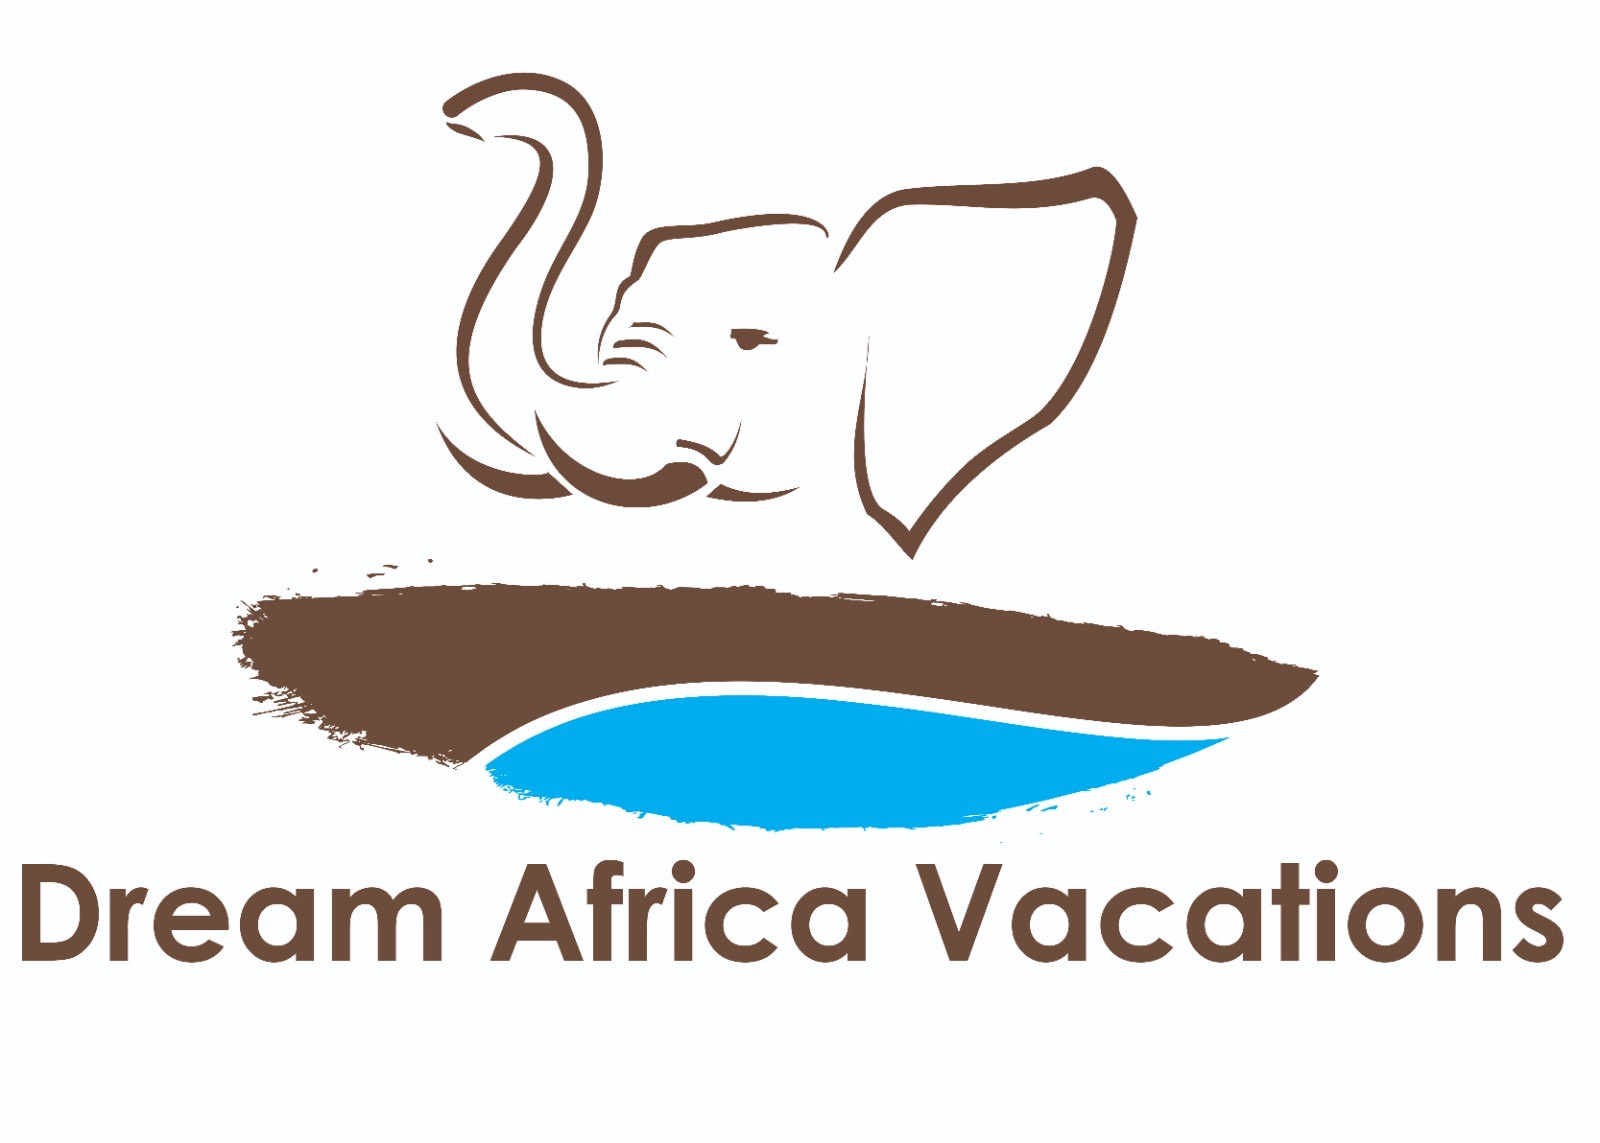 Dream Africa Vacations